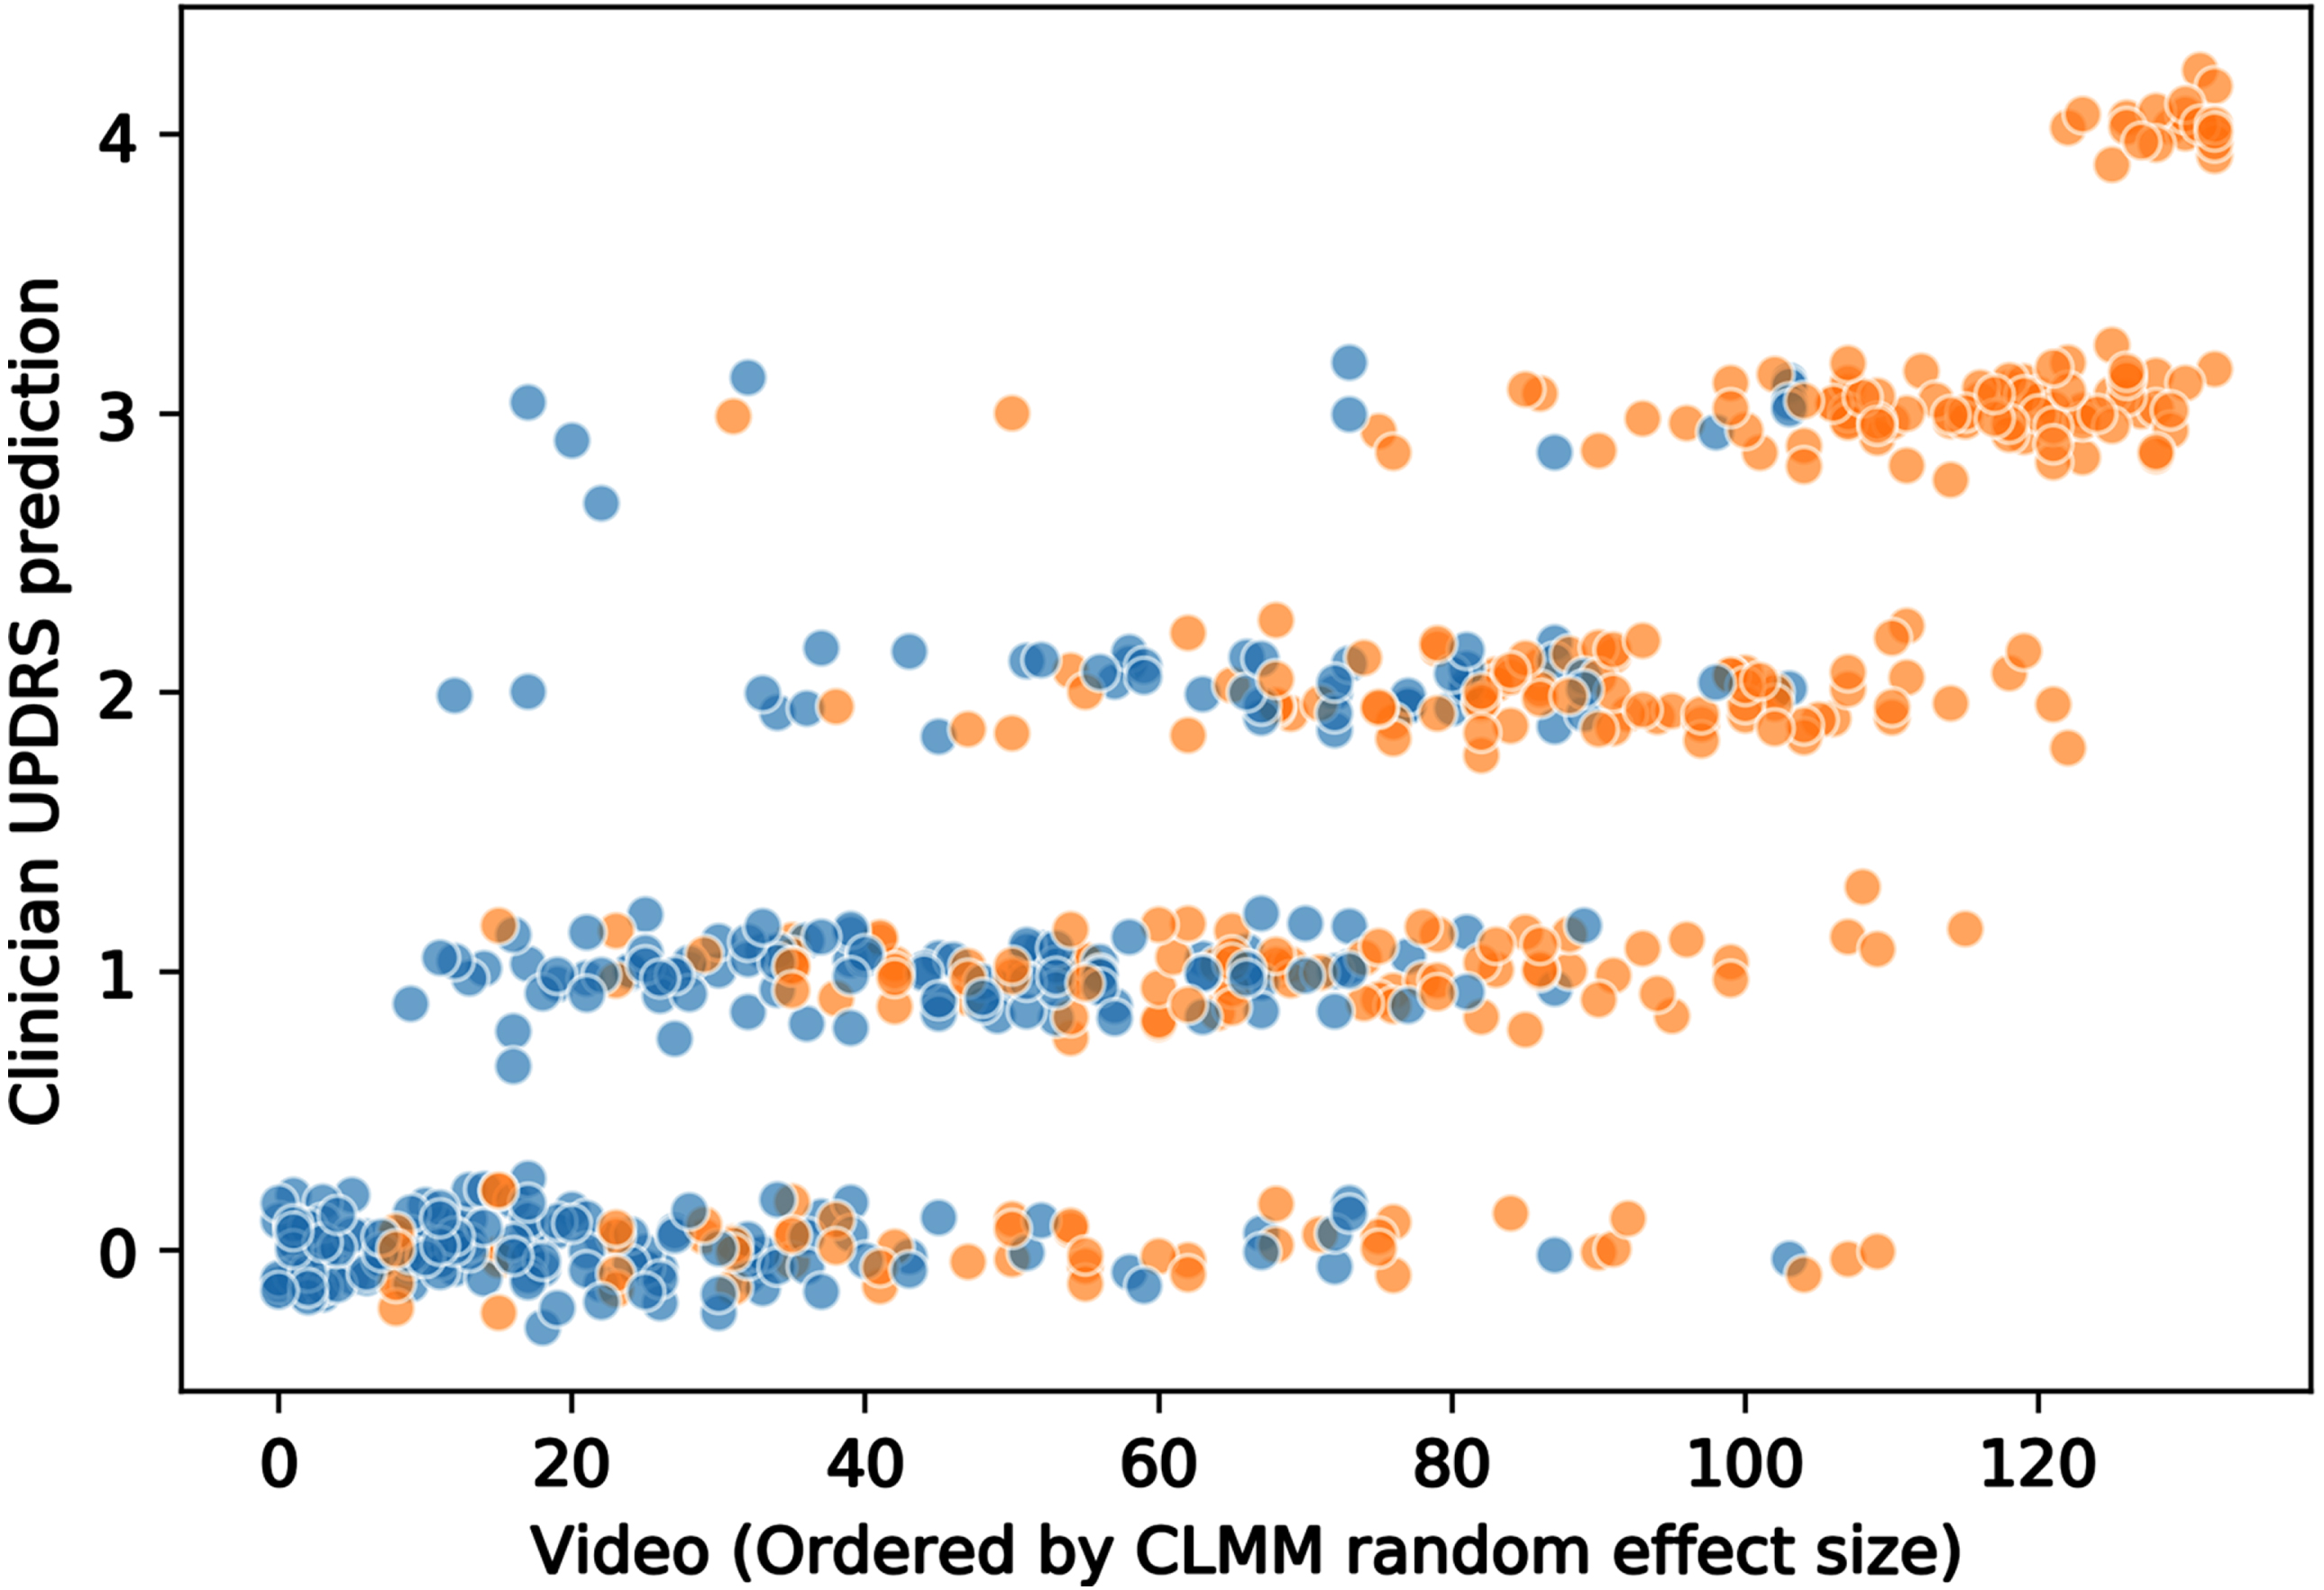 Distribution of movement disorder specialist MDS-UPDRS ratings for finger tapping videos. Each circle represents a video rating (jitter applied to aid visualization). Orange circles: people with Parkinson’s. Blue circles: healthy control participants. Videos are ordered on the x-axis by the video random effect size according to cumulative linked mixed model, CLMM (i.e., by severity of bradykinesia). It can be seen that there is considerable variation in clinician ratings.